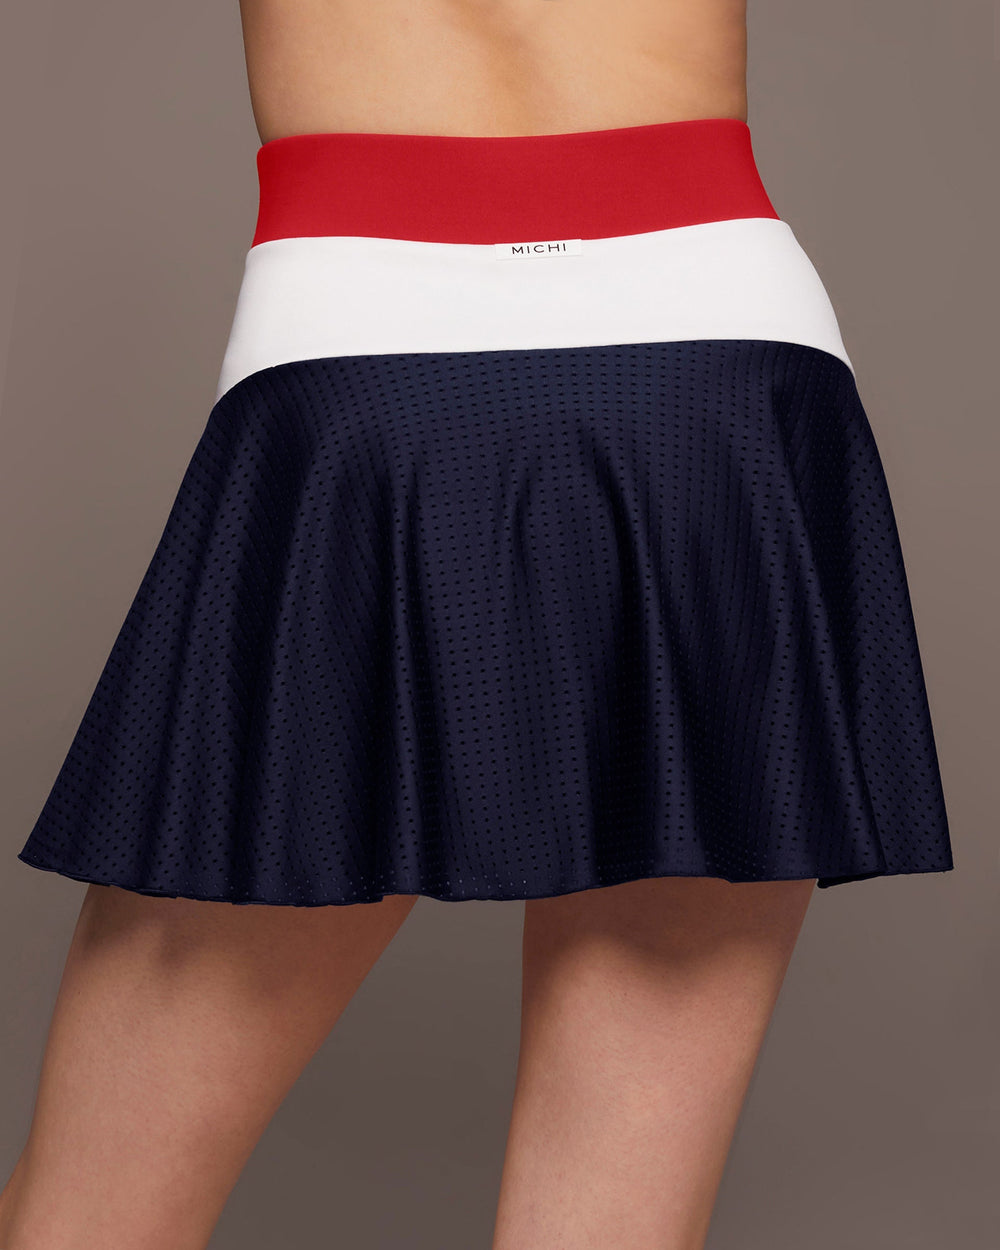 Electric Tennis Skirt w/ Shorts - White/Fire Red/Admiral Blue